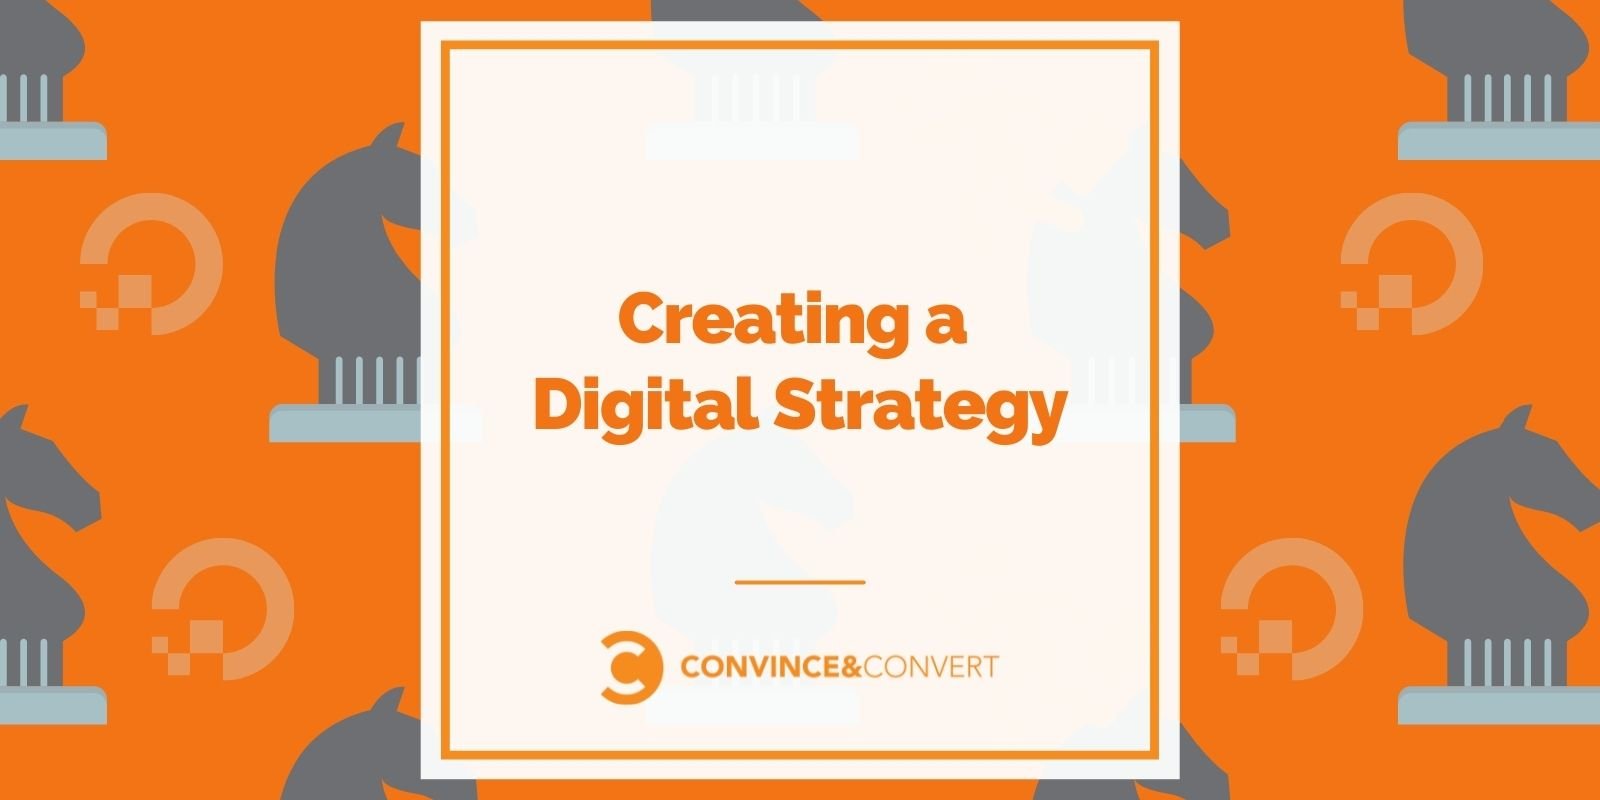 Developing a Digital Strategy